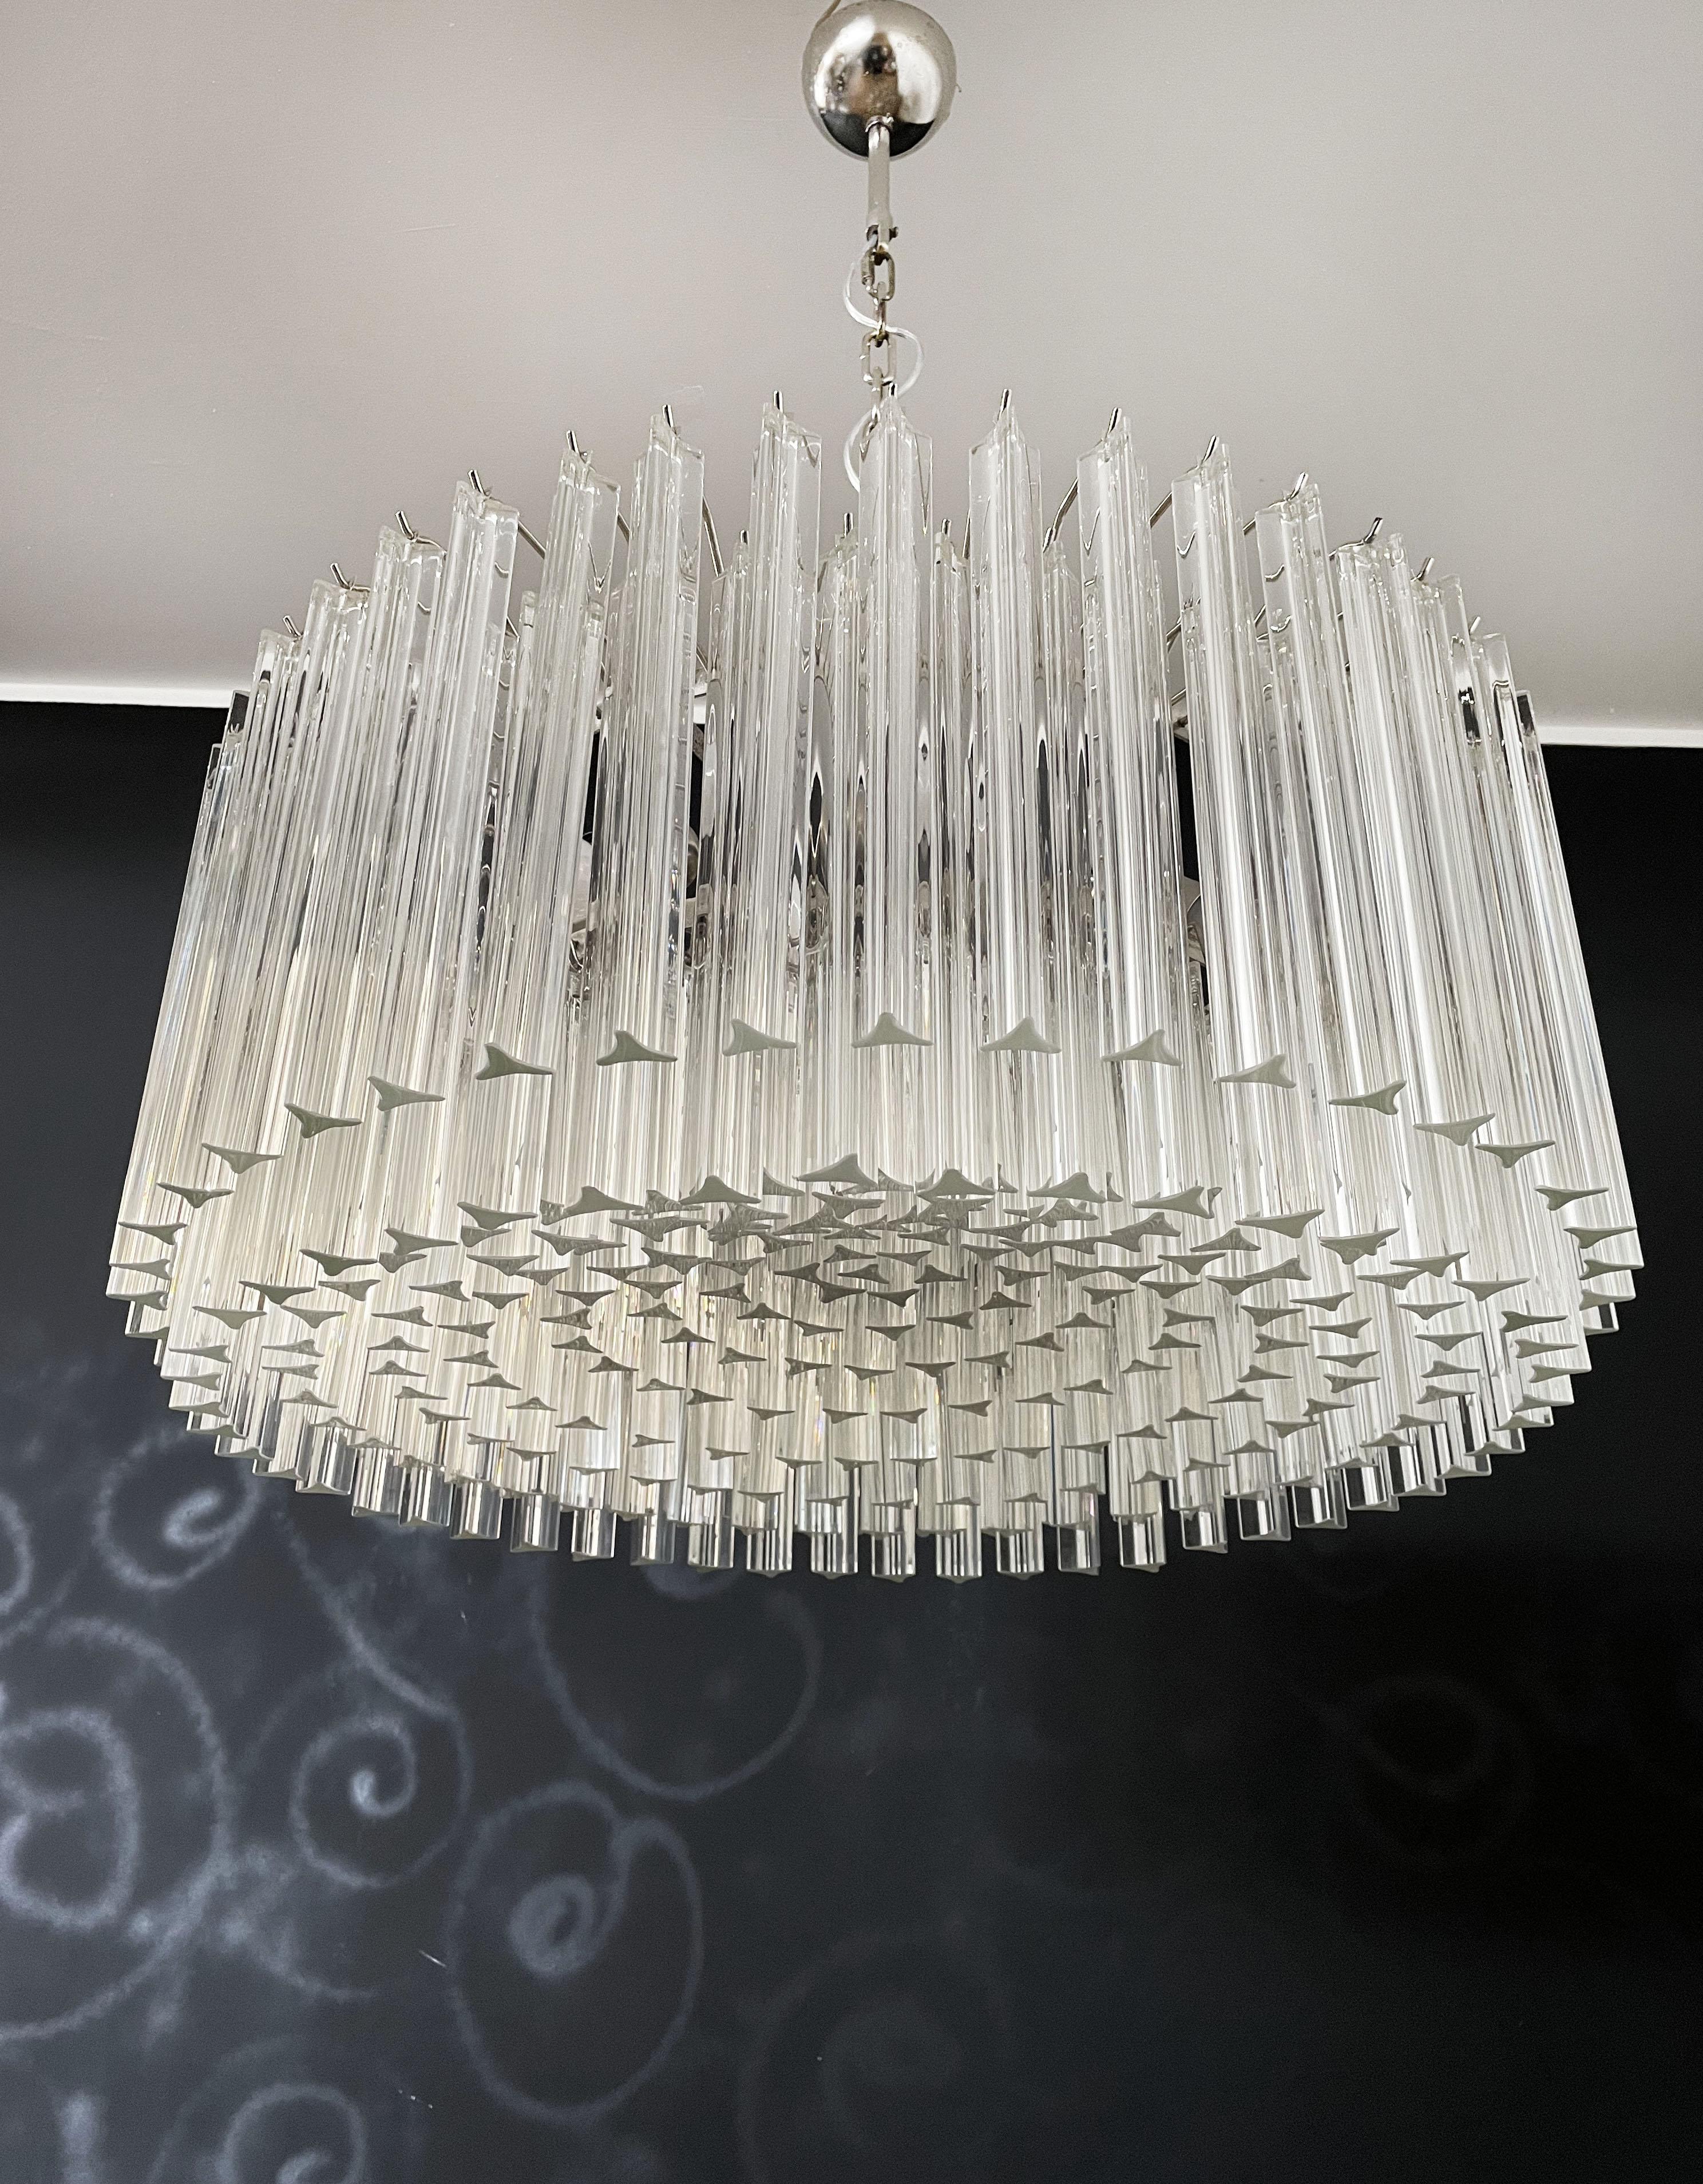 A magnificent Murano glass chandelier, 265 triedri on crome frame. This large Mid-Century Italian chandelier is truly a timeless classic.
Period: late XX century
Dimensions: 43,30 inches (110 cm) height with chain; 15,75 inches (40 cm) height